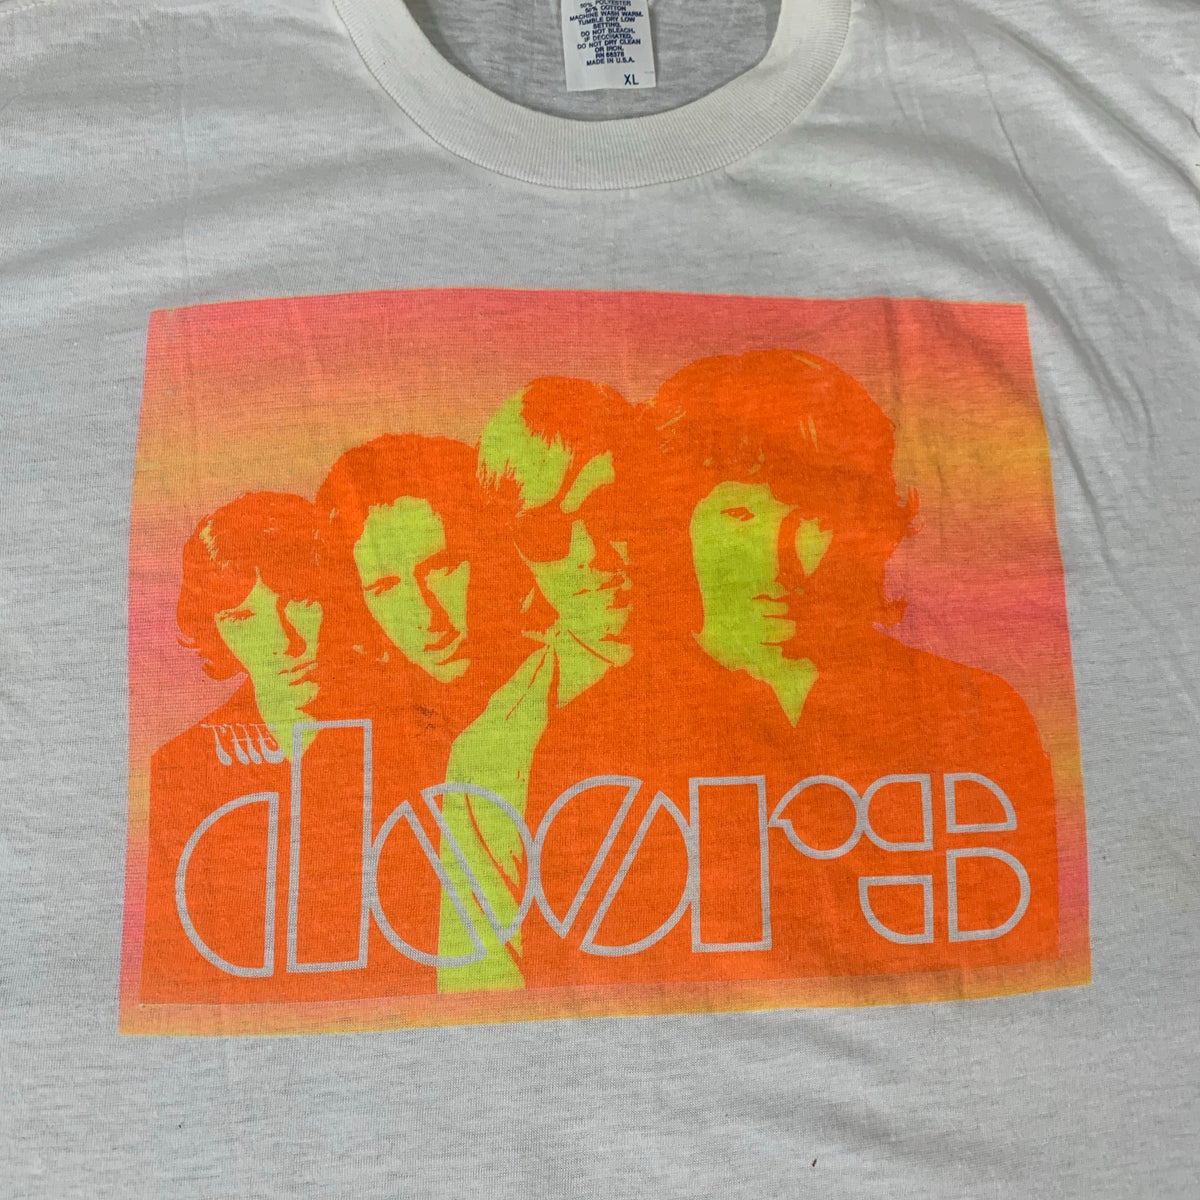 Vintage The Doors “Group Photo” T-Shirt